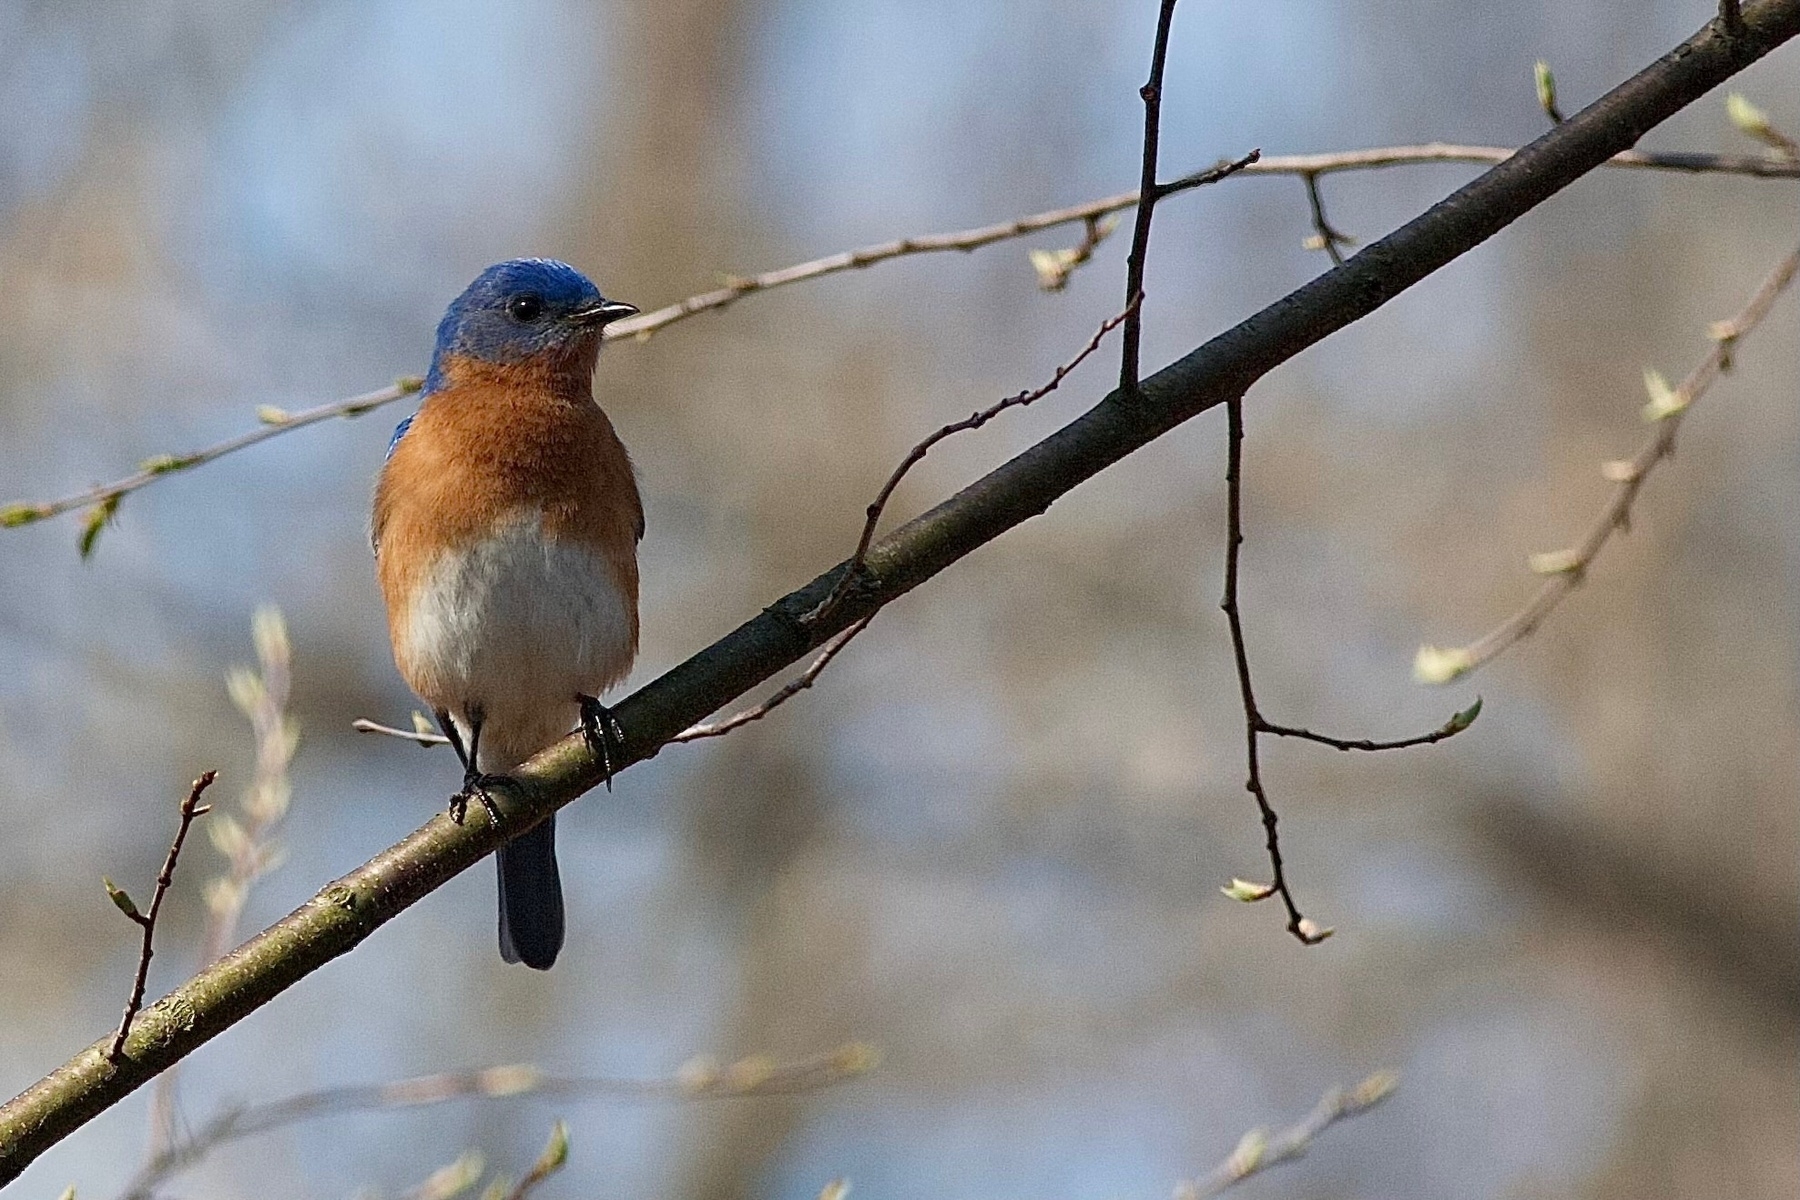 A Bluebird perched on a branch and facing the camera. It's chest feathers are  golden brown towards the top and white towards the bottom. It's head is vibrant blue. The background is blurred forest.